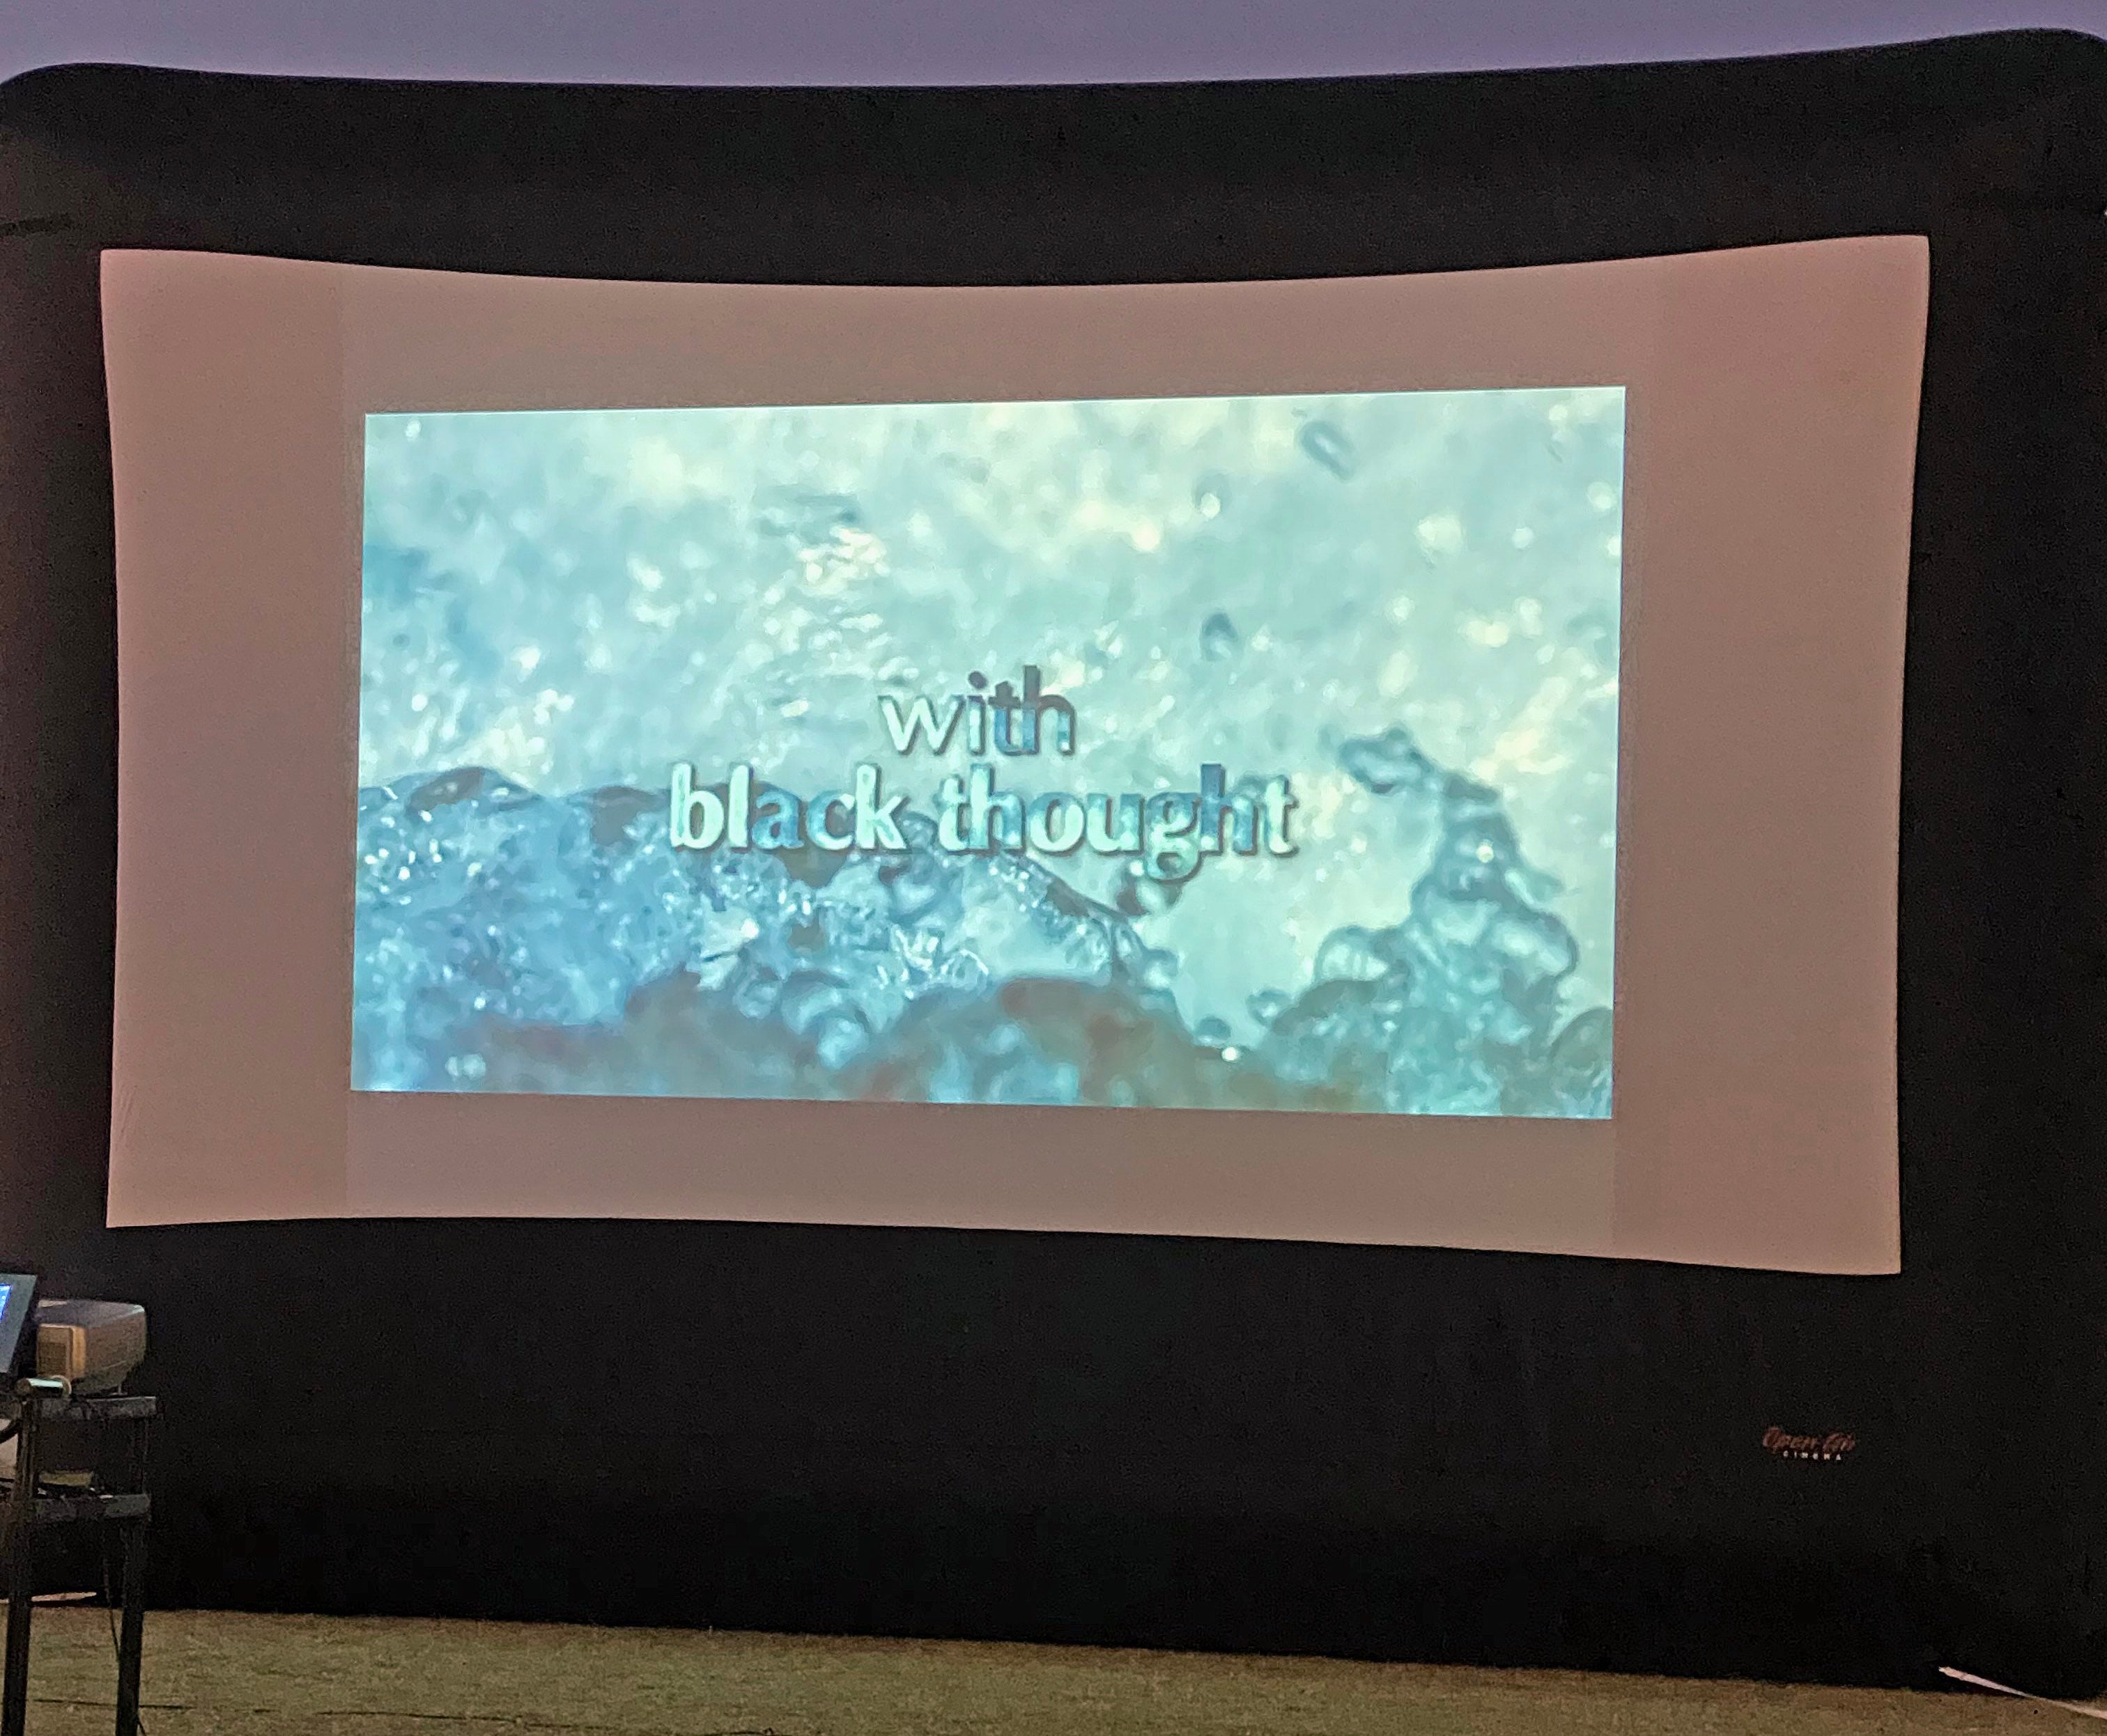 a projection screen shows a watery background with the words "With black thought"